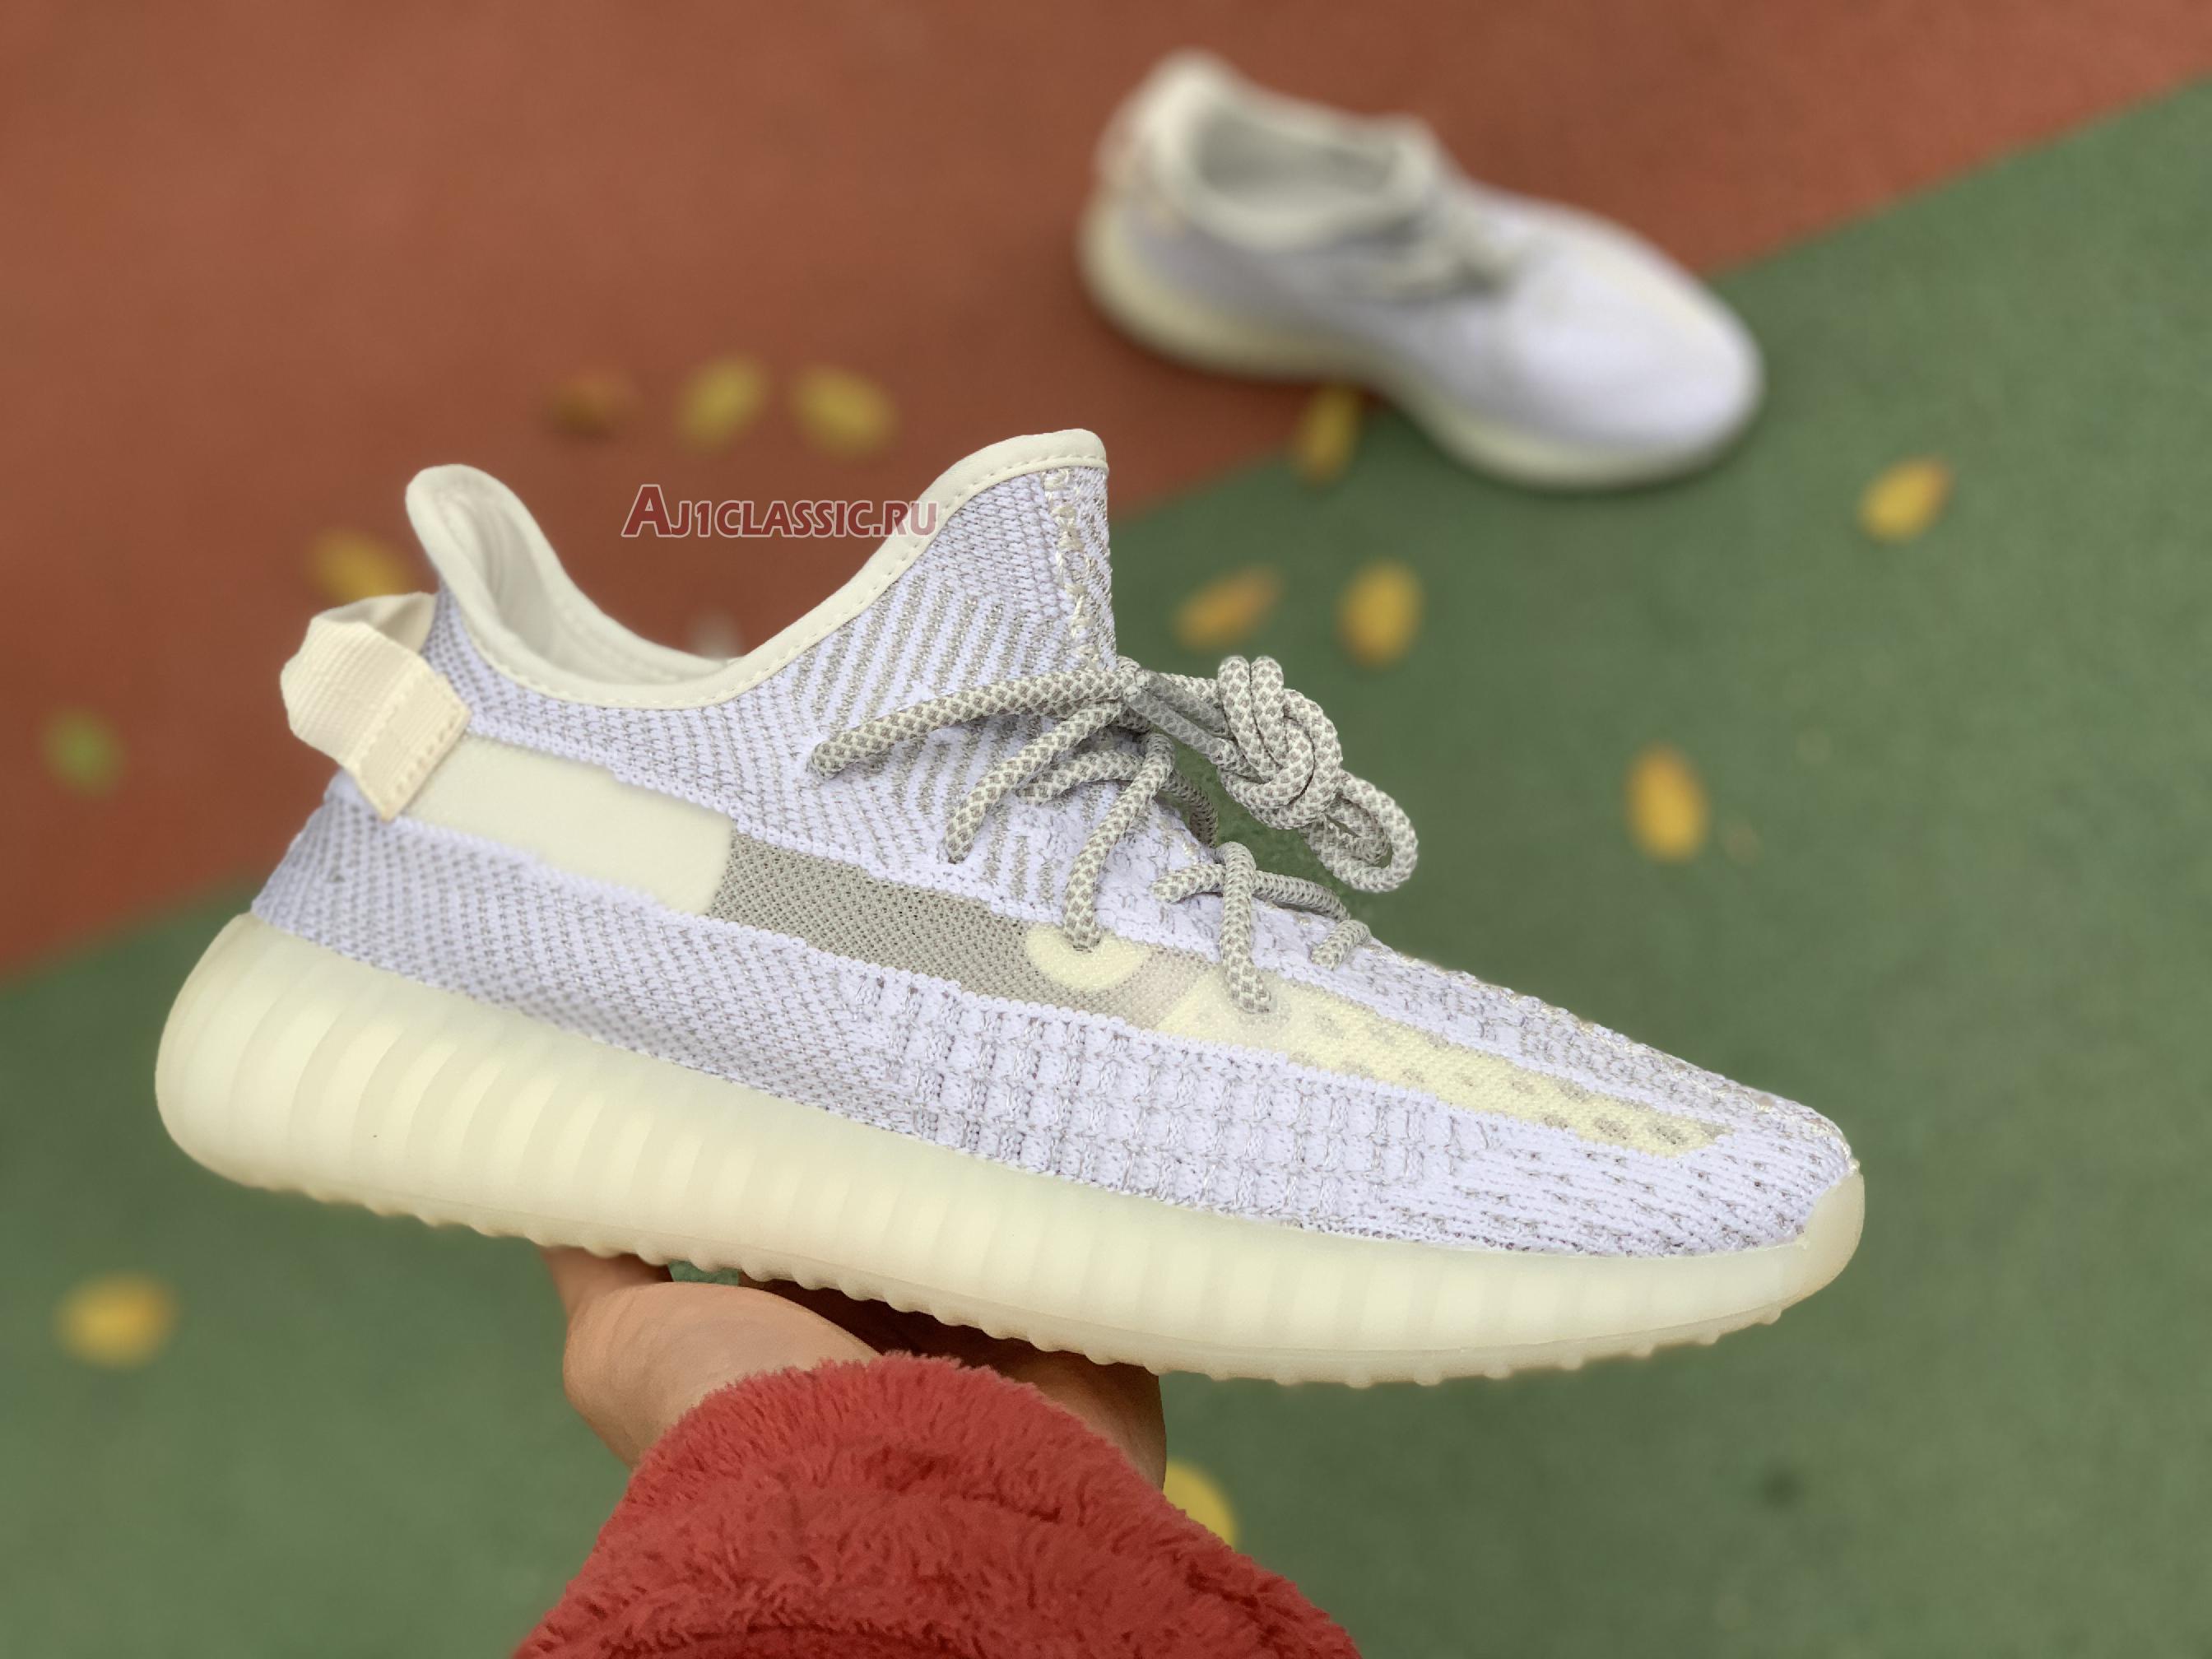 Adidas Yeezy Boost 350 V2 Static Reflective EF2367 Static/Static/Static Sneakers